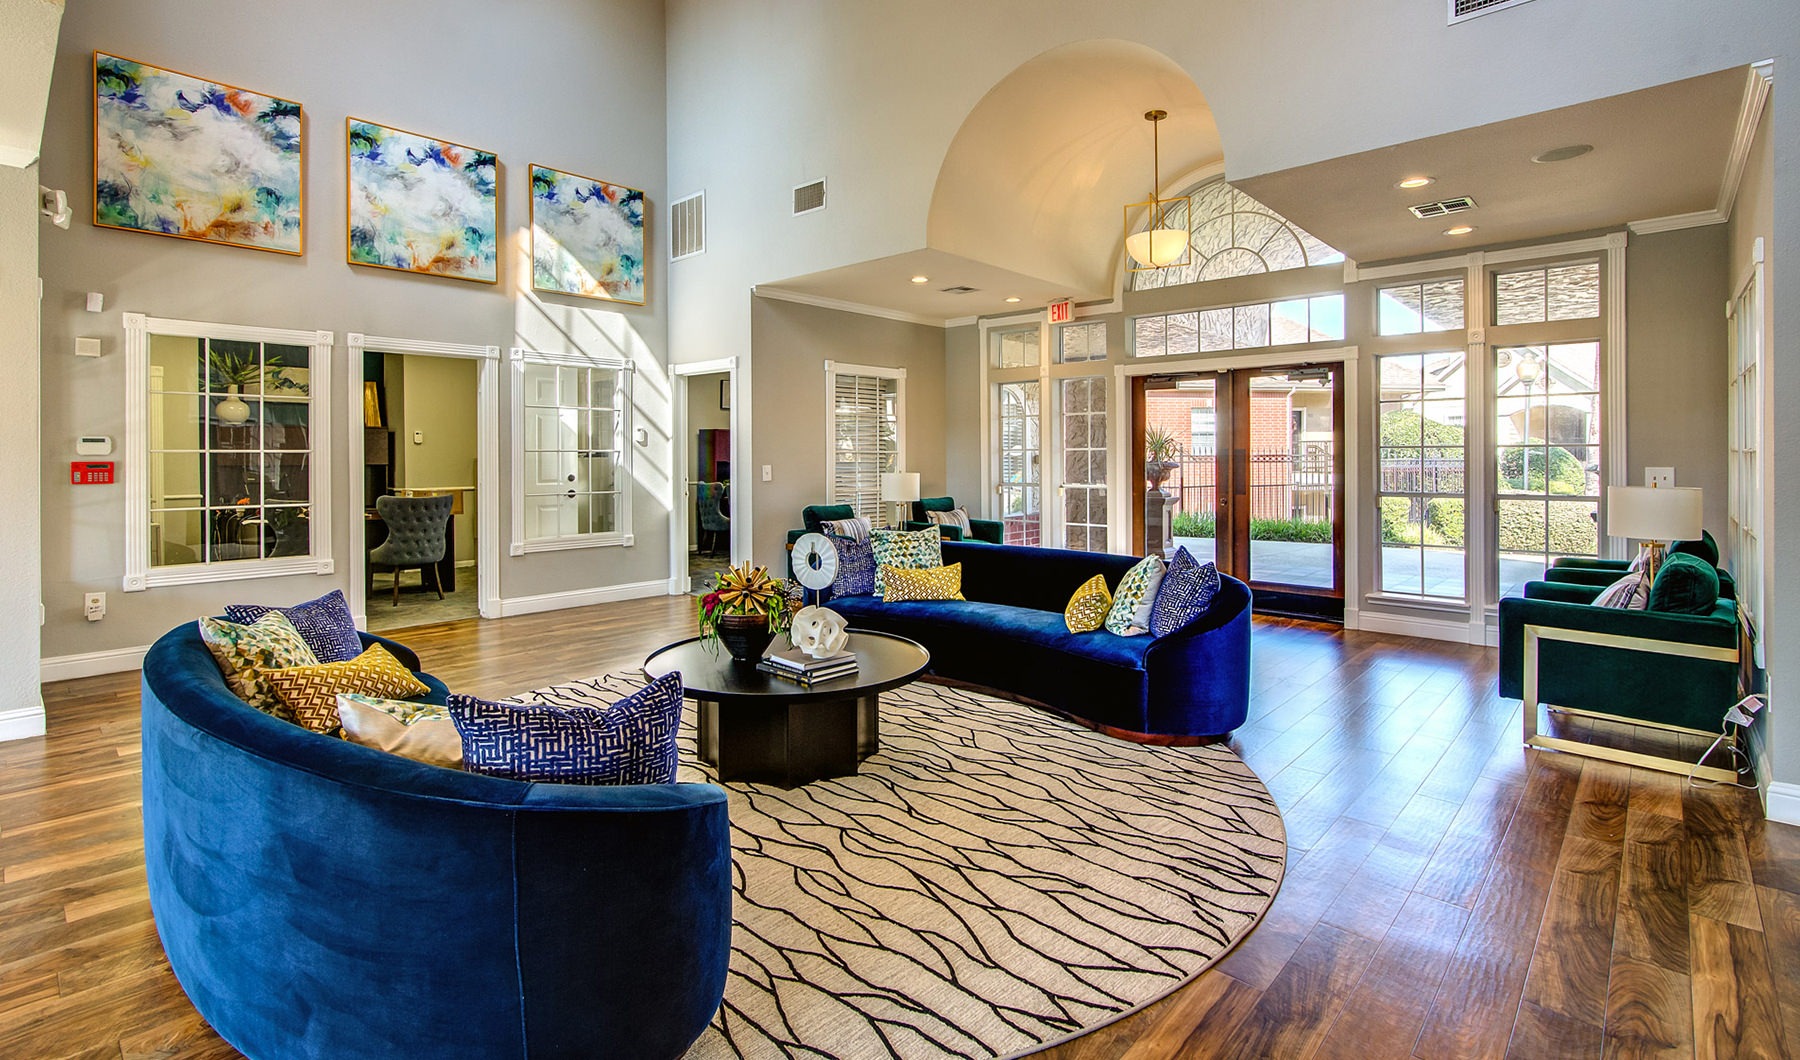 1, 2, & 3 Bedroom Apartments in Grapevine, TX